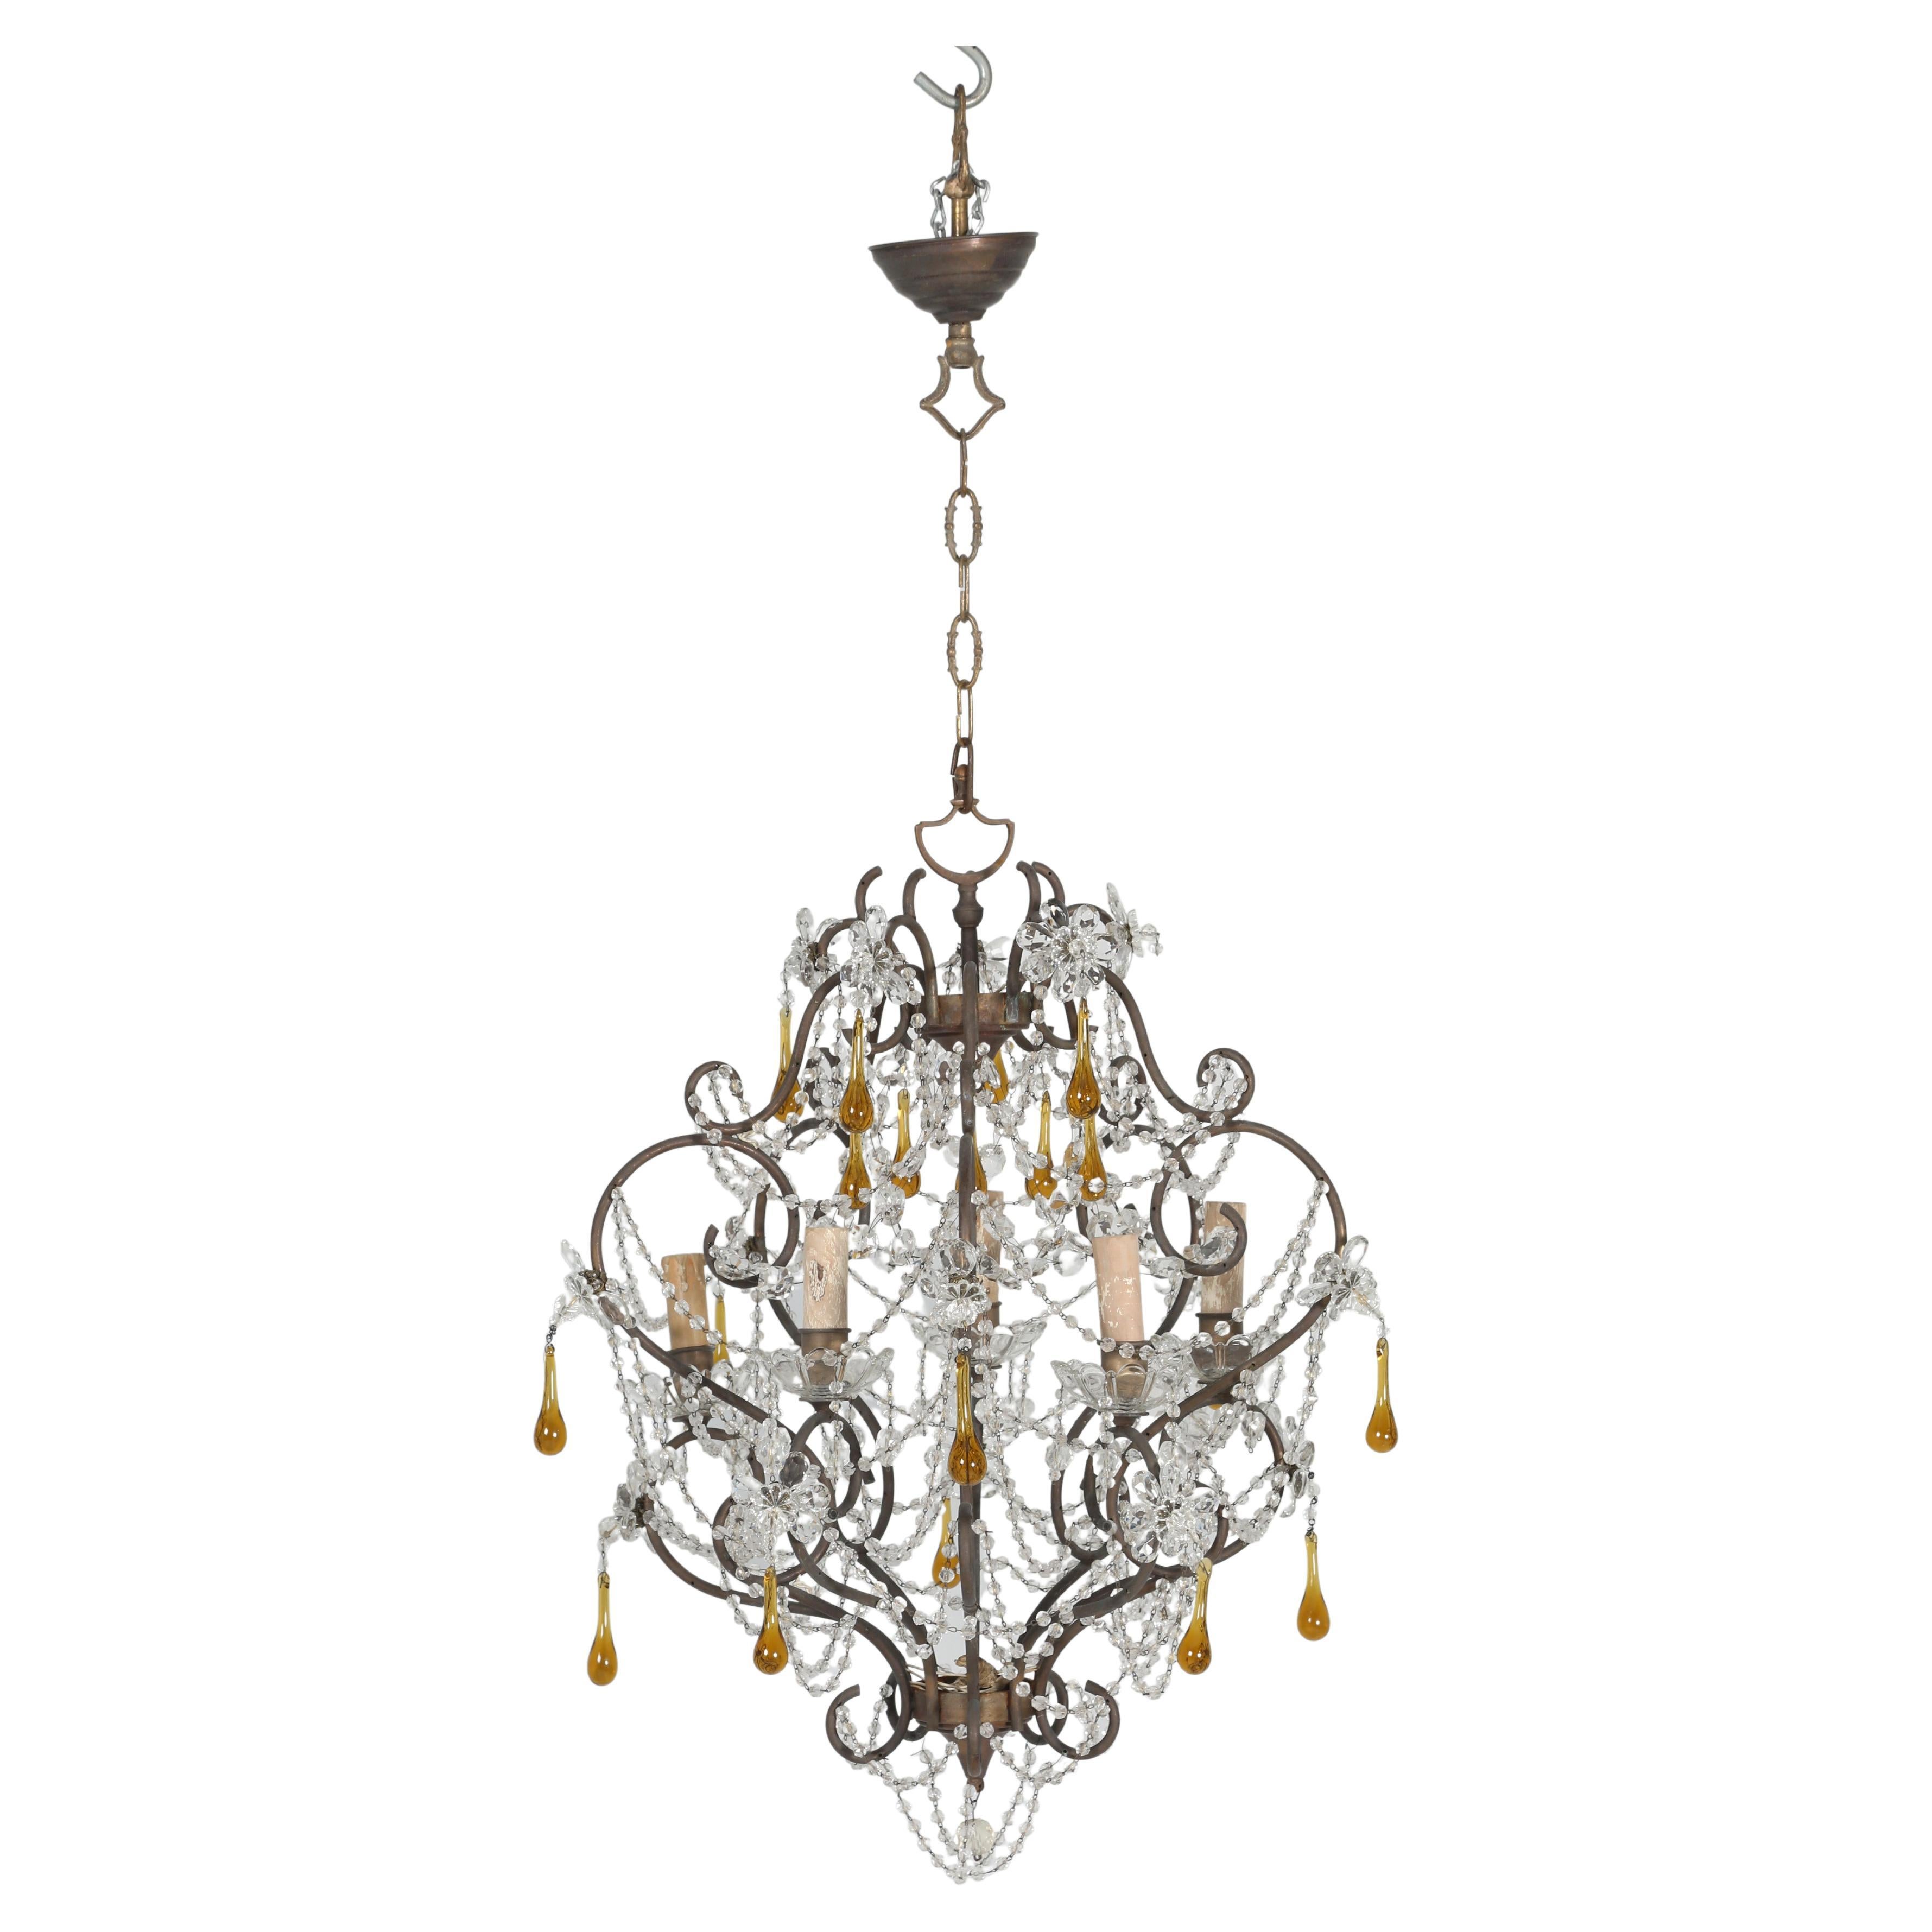 Vintage Italian 5-Light Chandelier with Matching Canopy